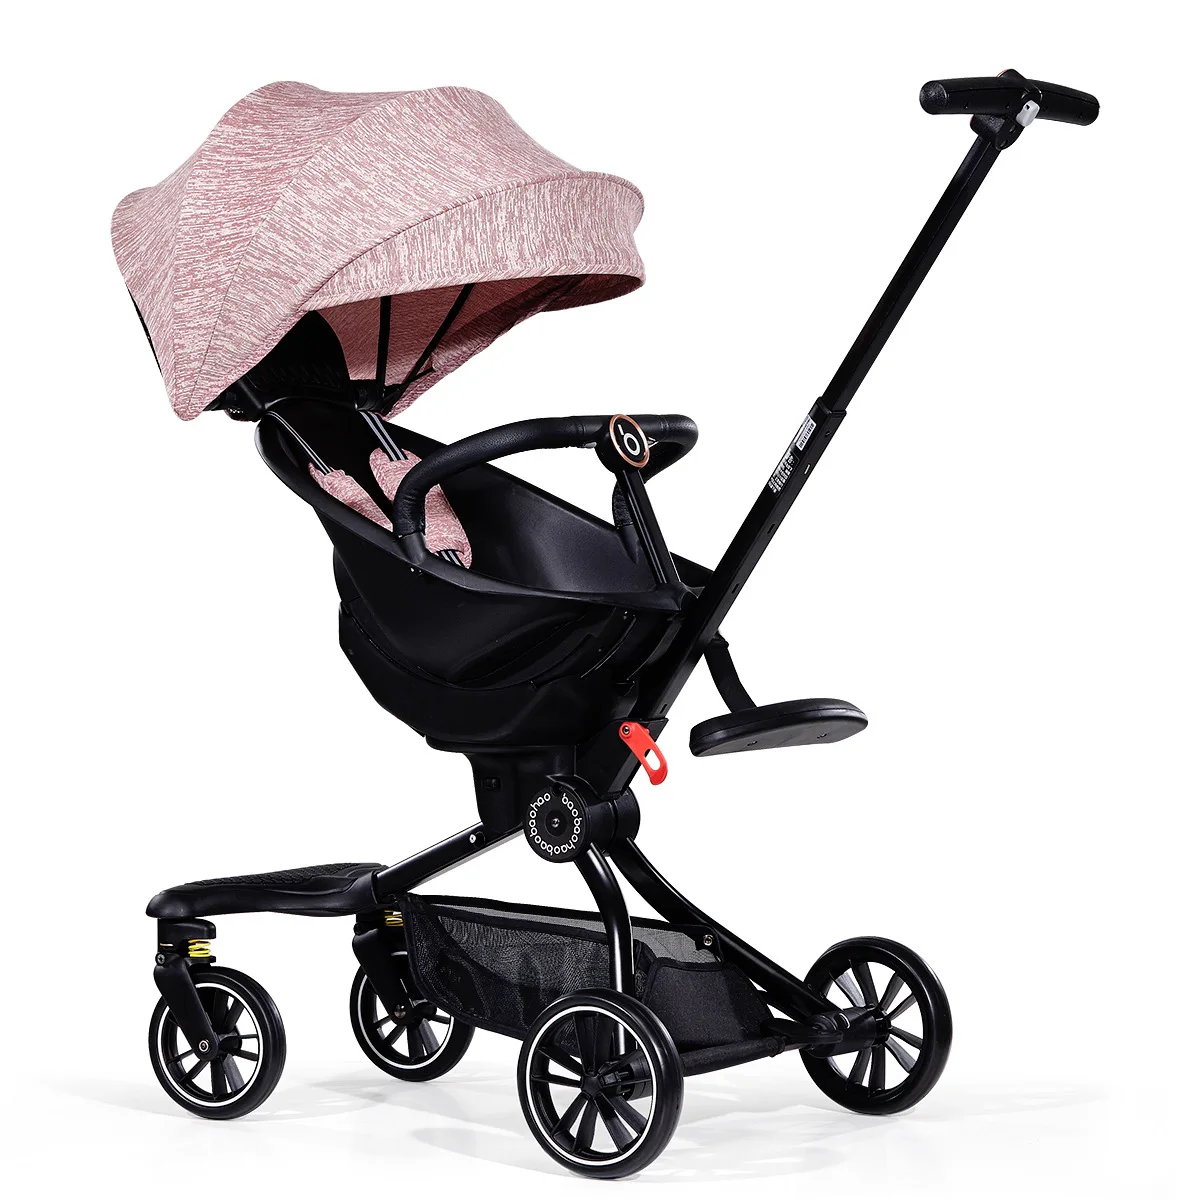 Baby Good V8 Baby Walker Artifact Walking Baby Stroller Can Sit and Lie Down Light Folding High-view Stroller Stroller